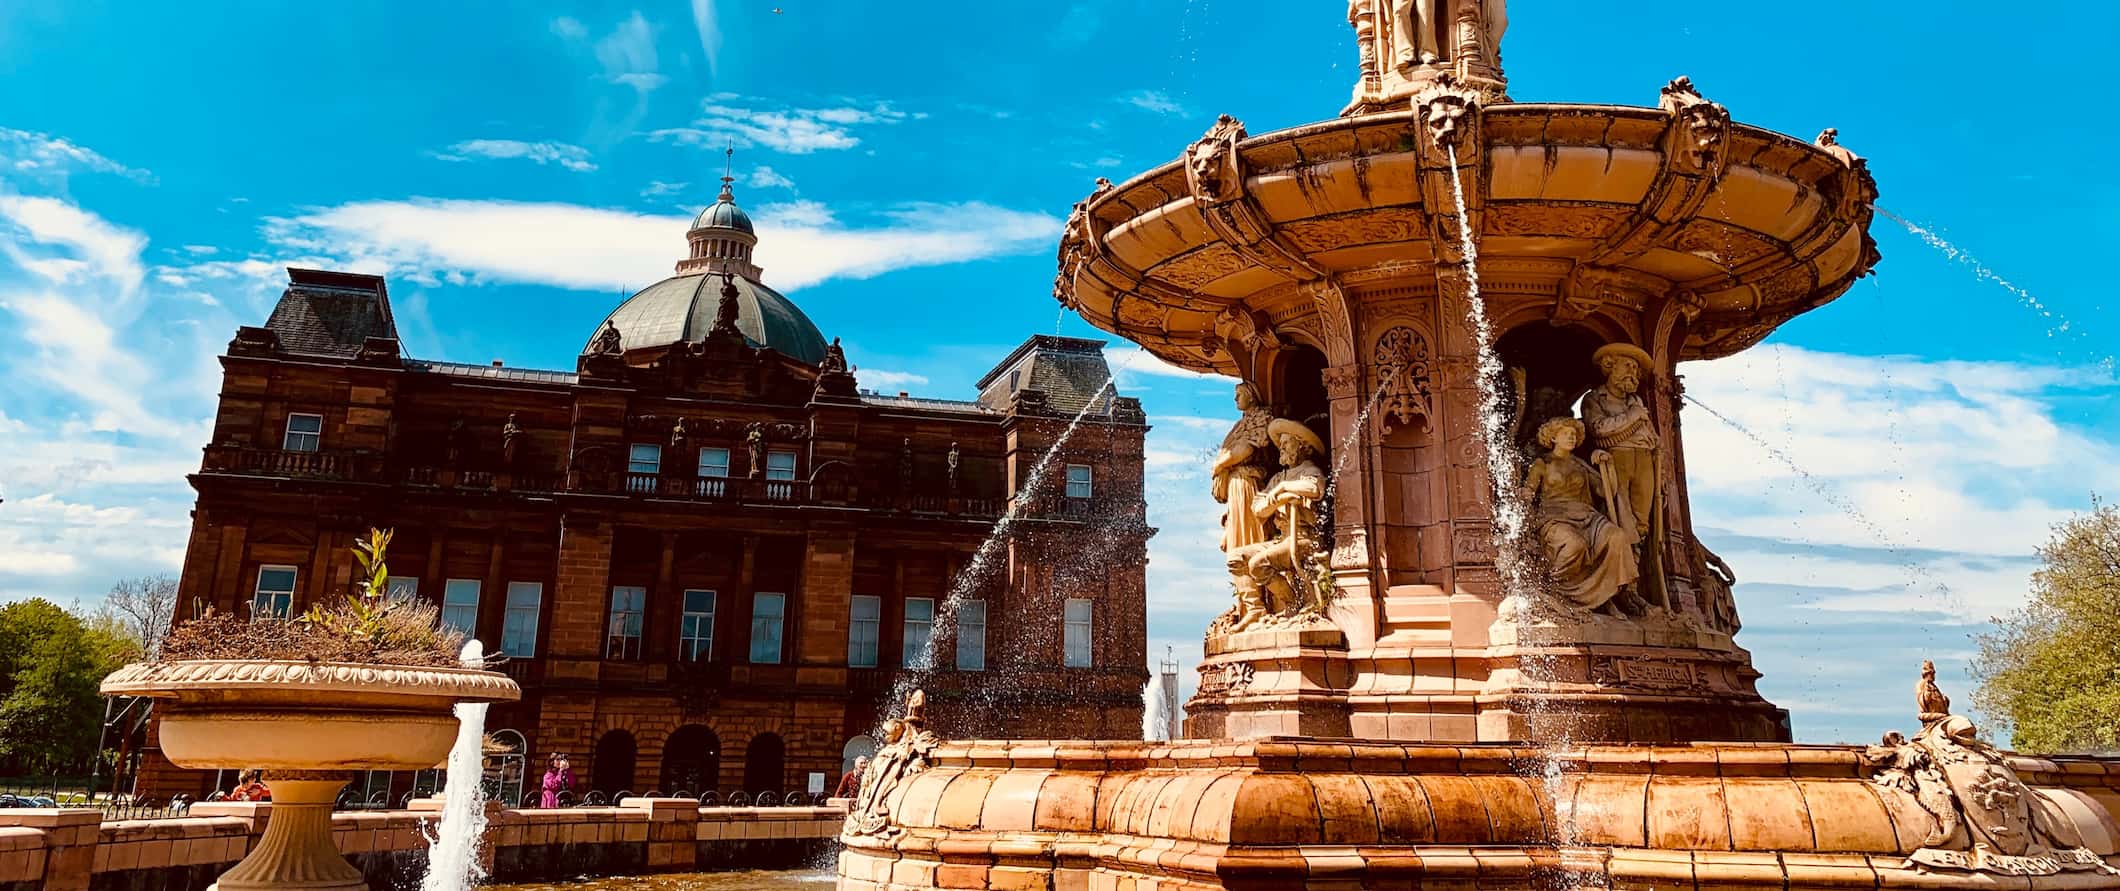 Historic buildings and an old fountain in Glasgow, Scotland on a sunny summer day